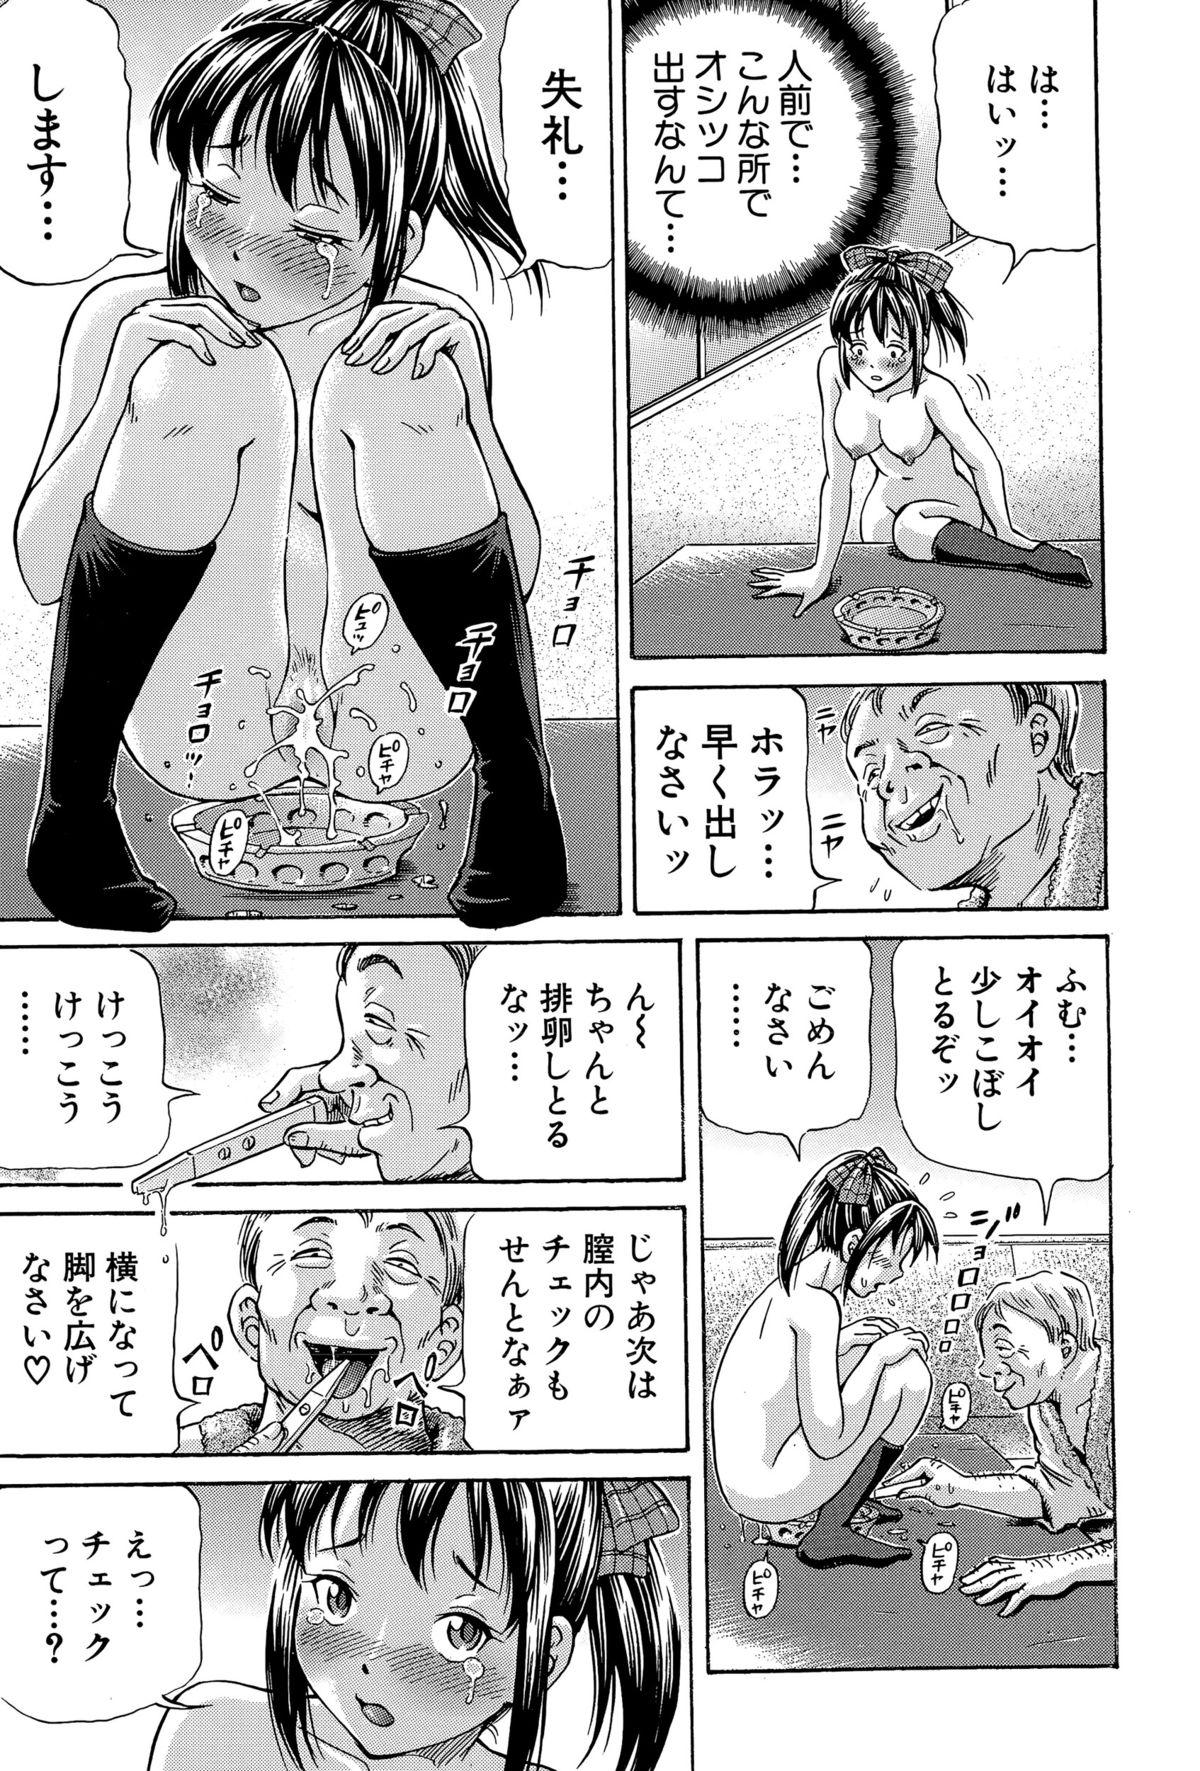 BUSTER COMIC 2015-11 206